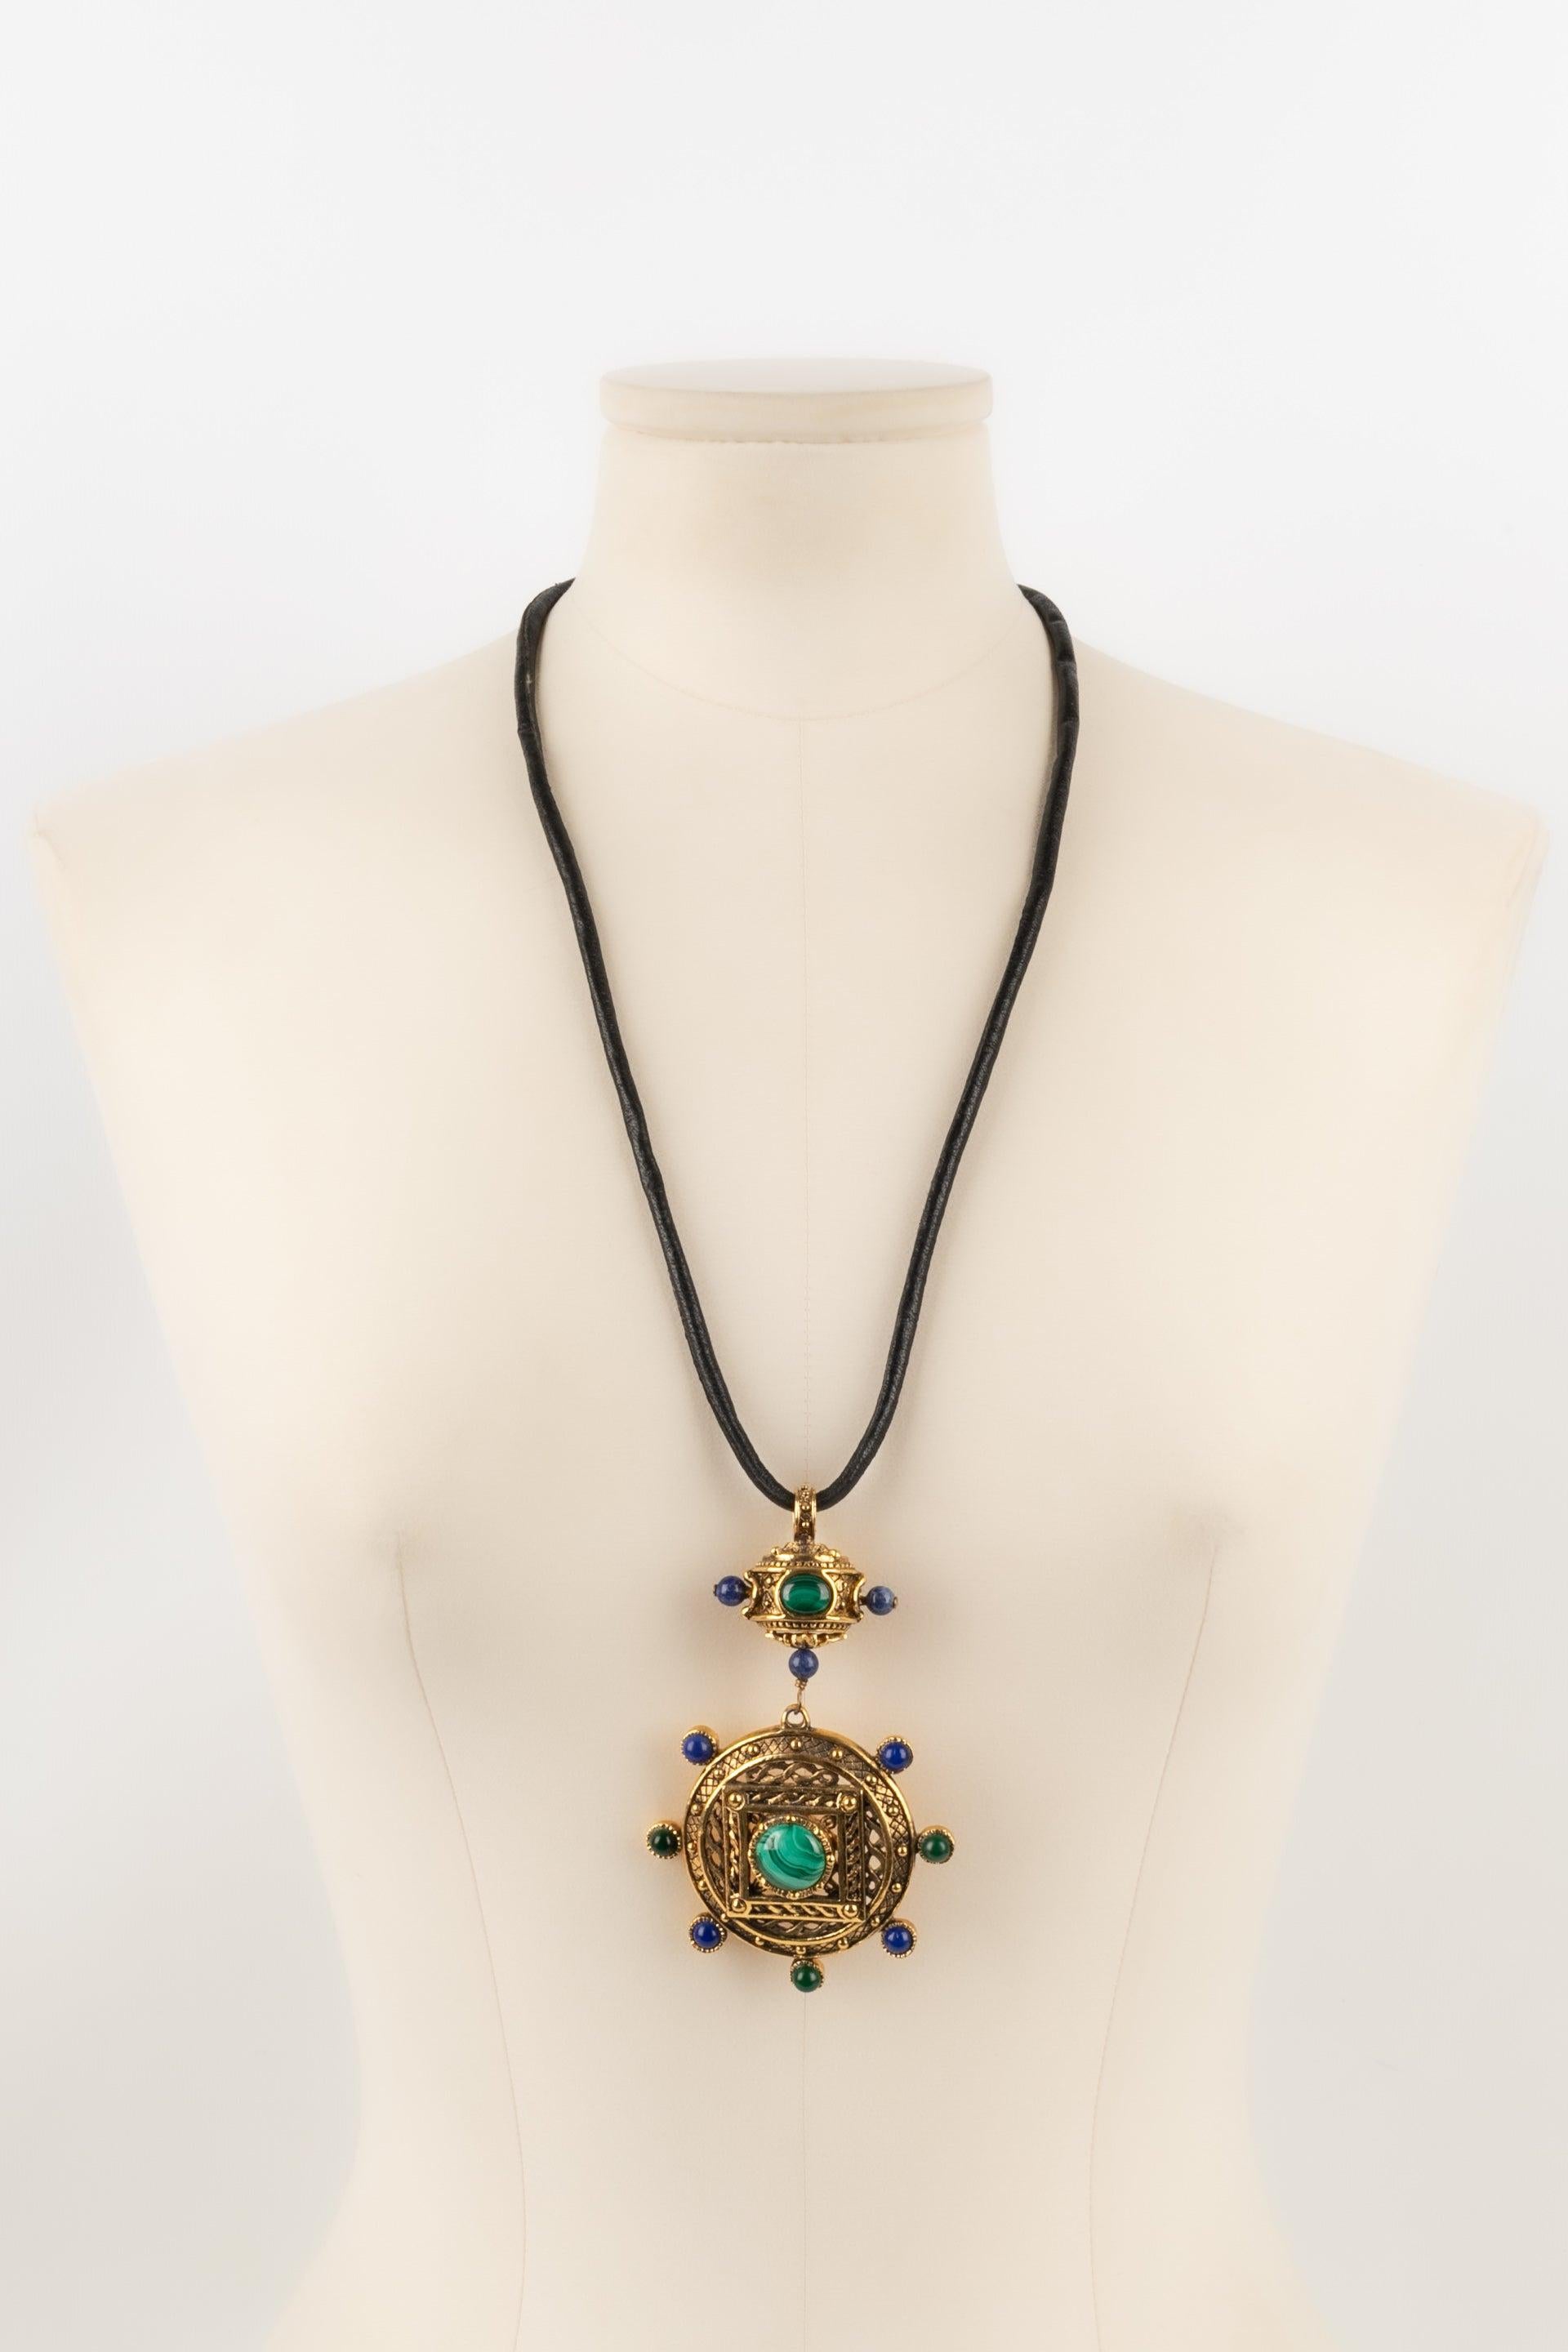 Dior - Leather necklace with a golden metal pendant and glass paste cabochons.

Additional information:
Condition: Very good condition
Dimensions: Length: 66 cm

Seller Reference: BC114